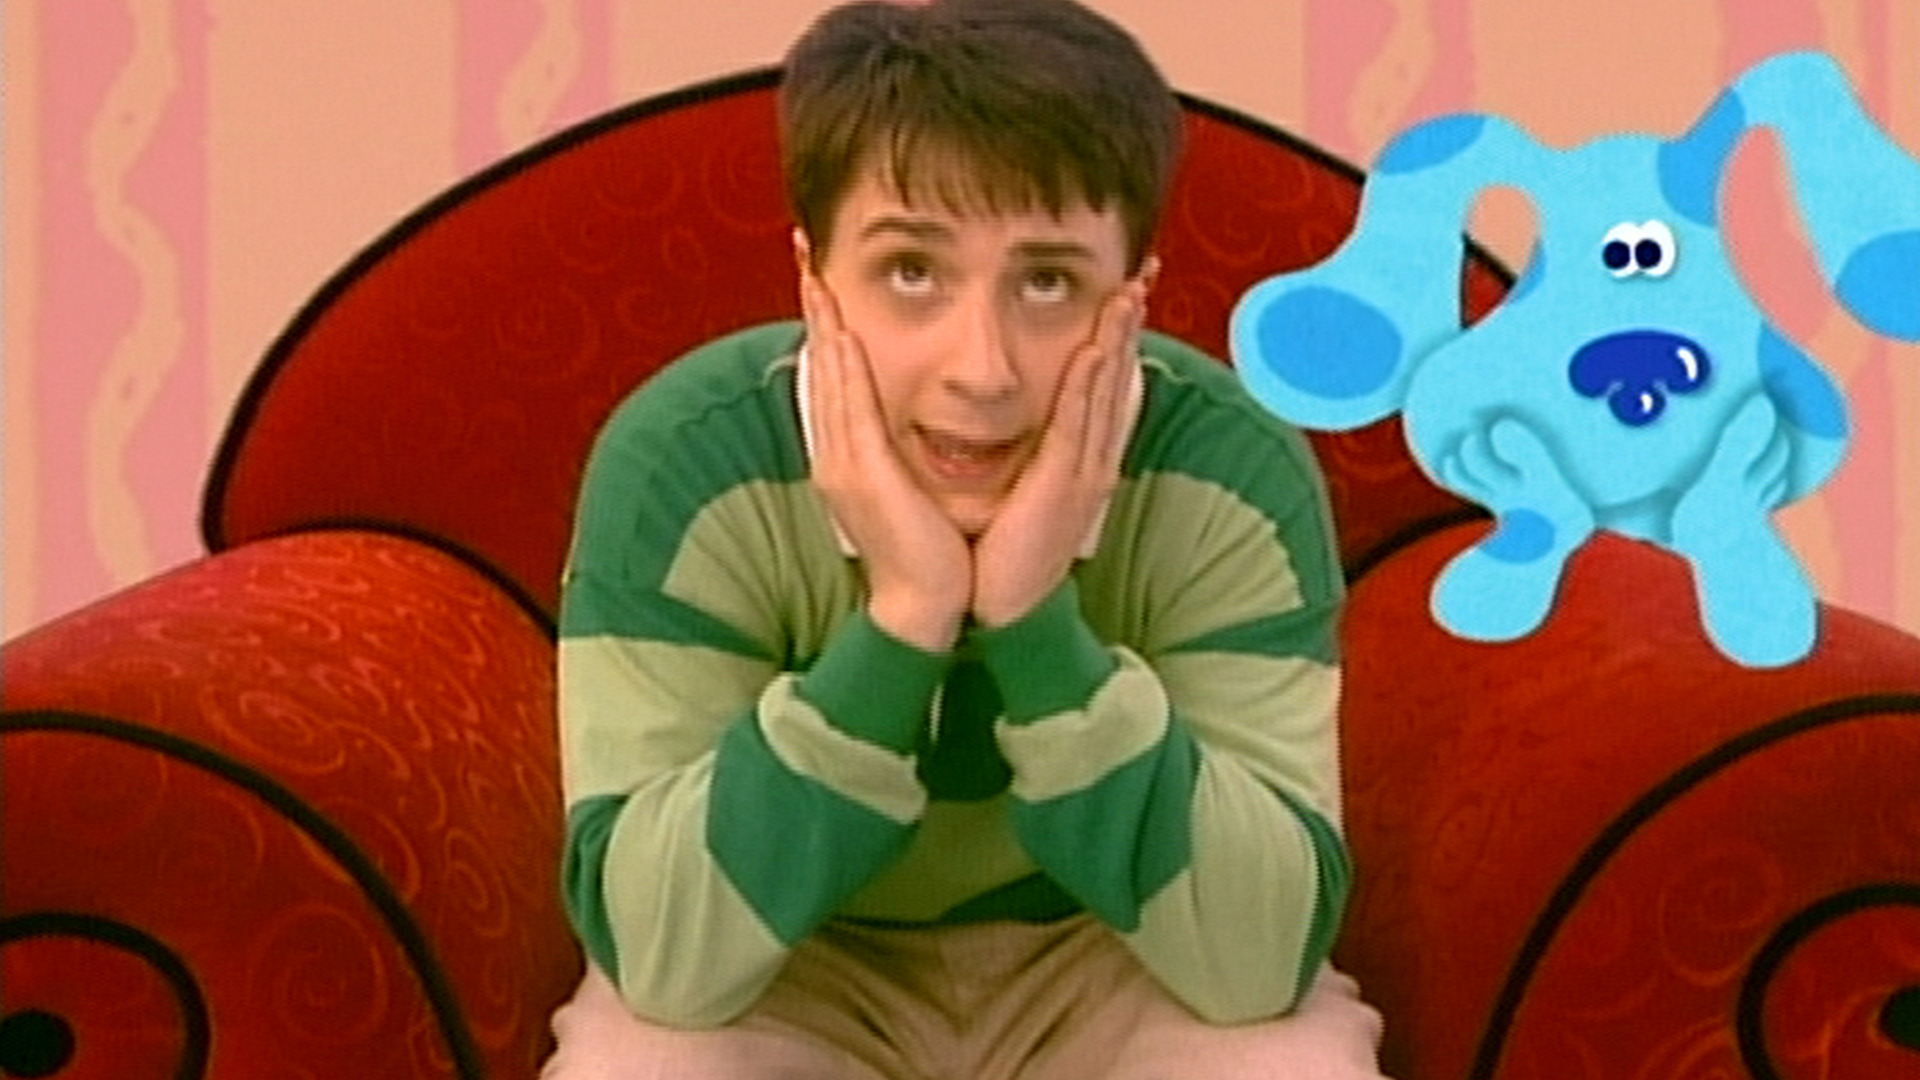 watch-blue-s-clues-season-1-episode-10-the-trying-game-full-show-on